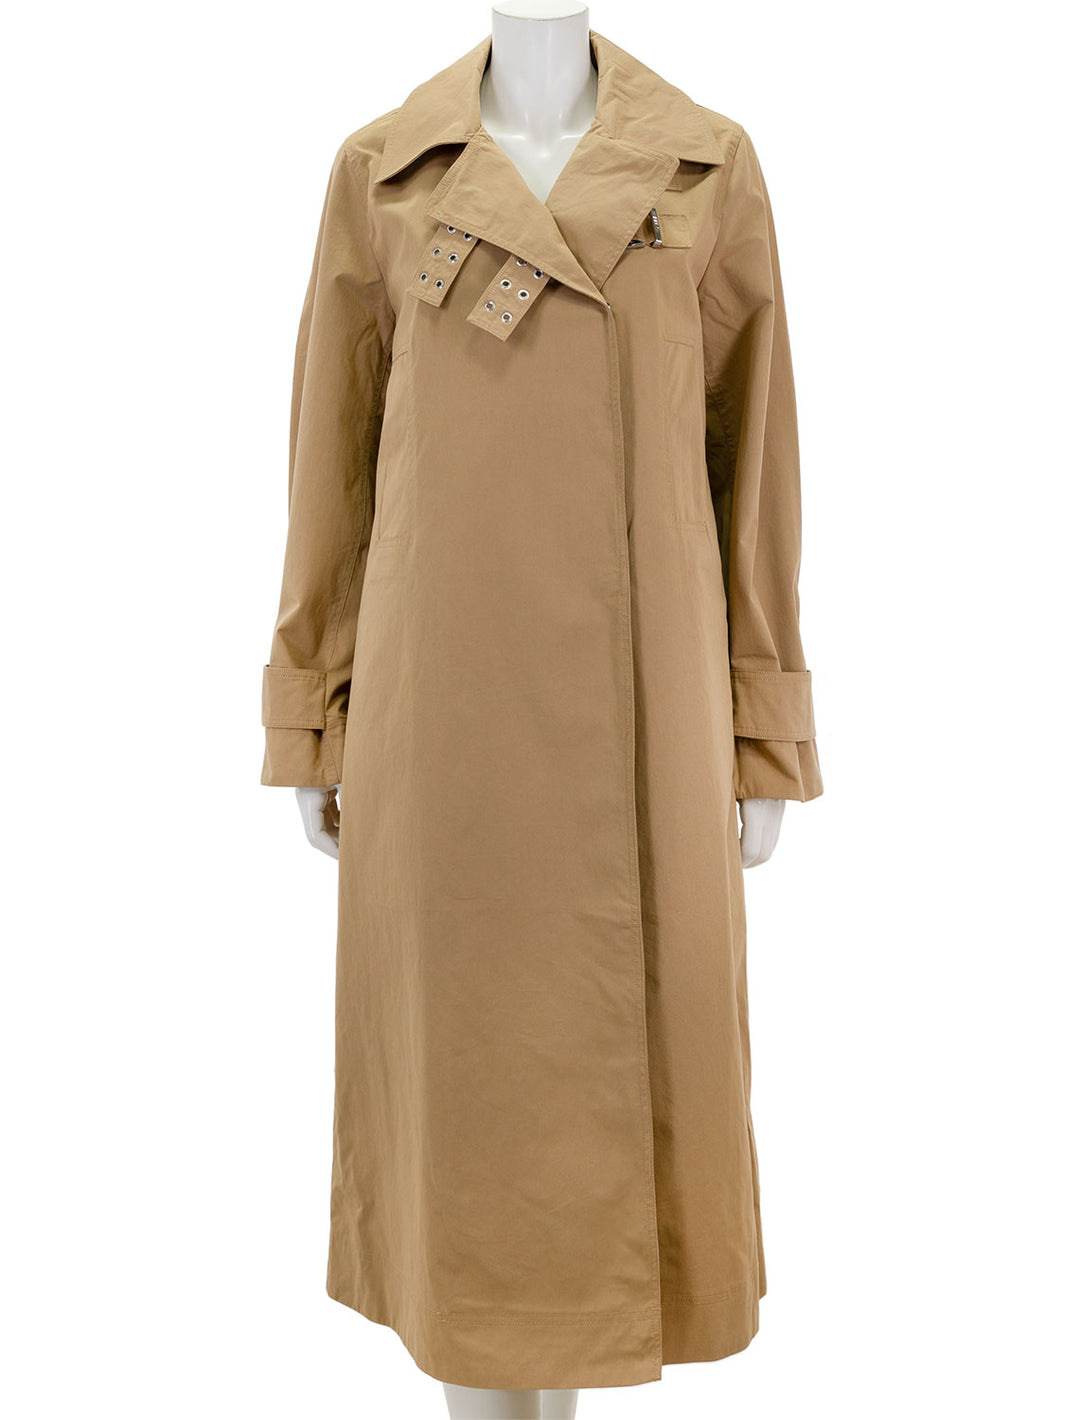 Front view of GANNI's cotton twill coat in tigers eye.